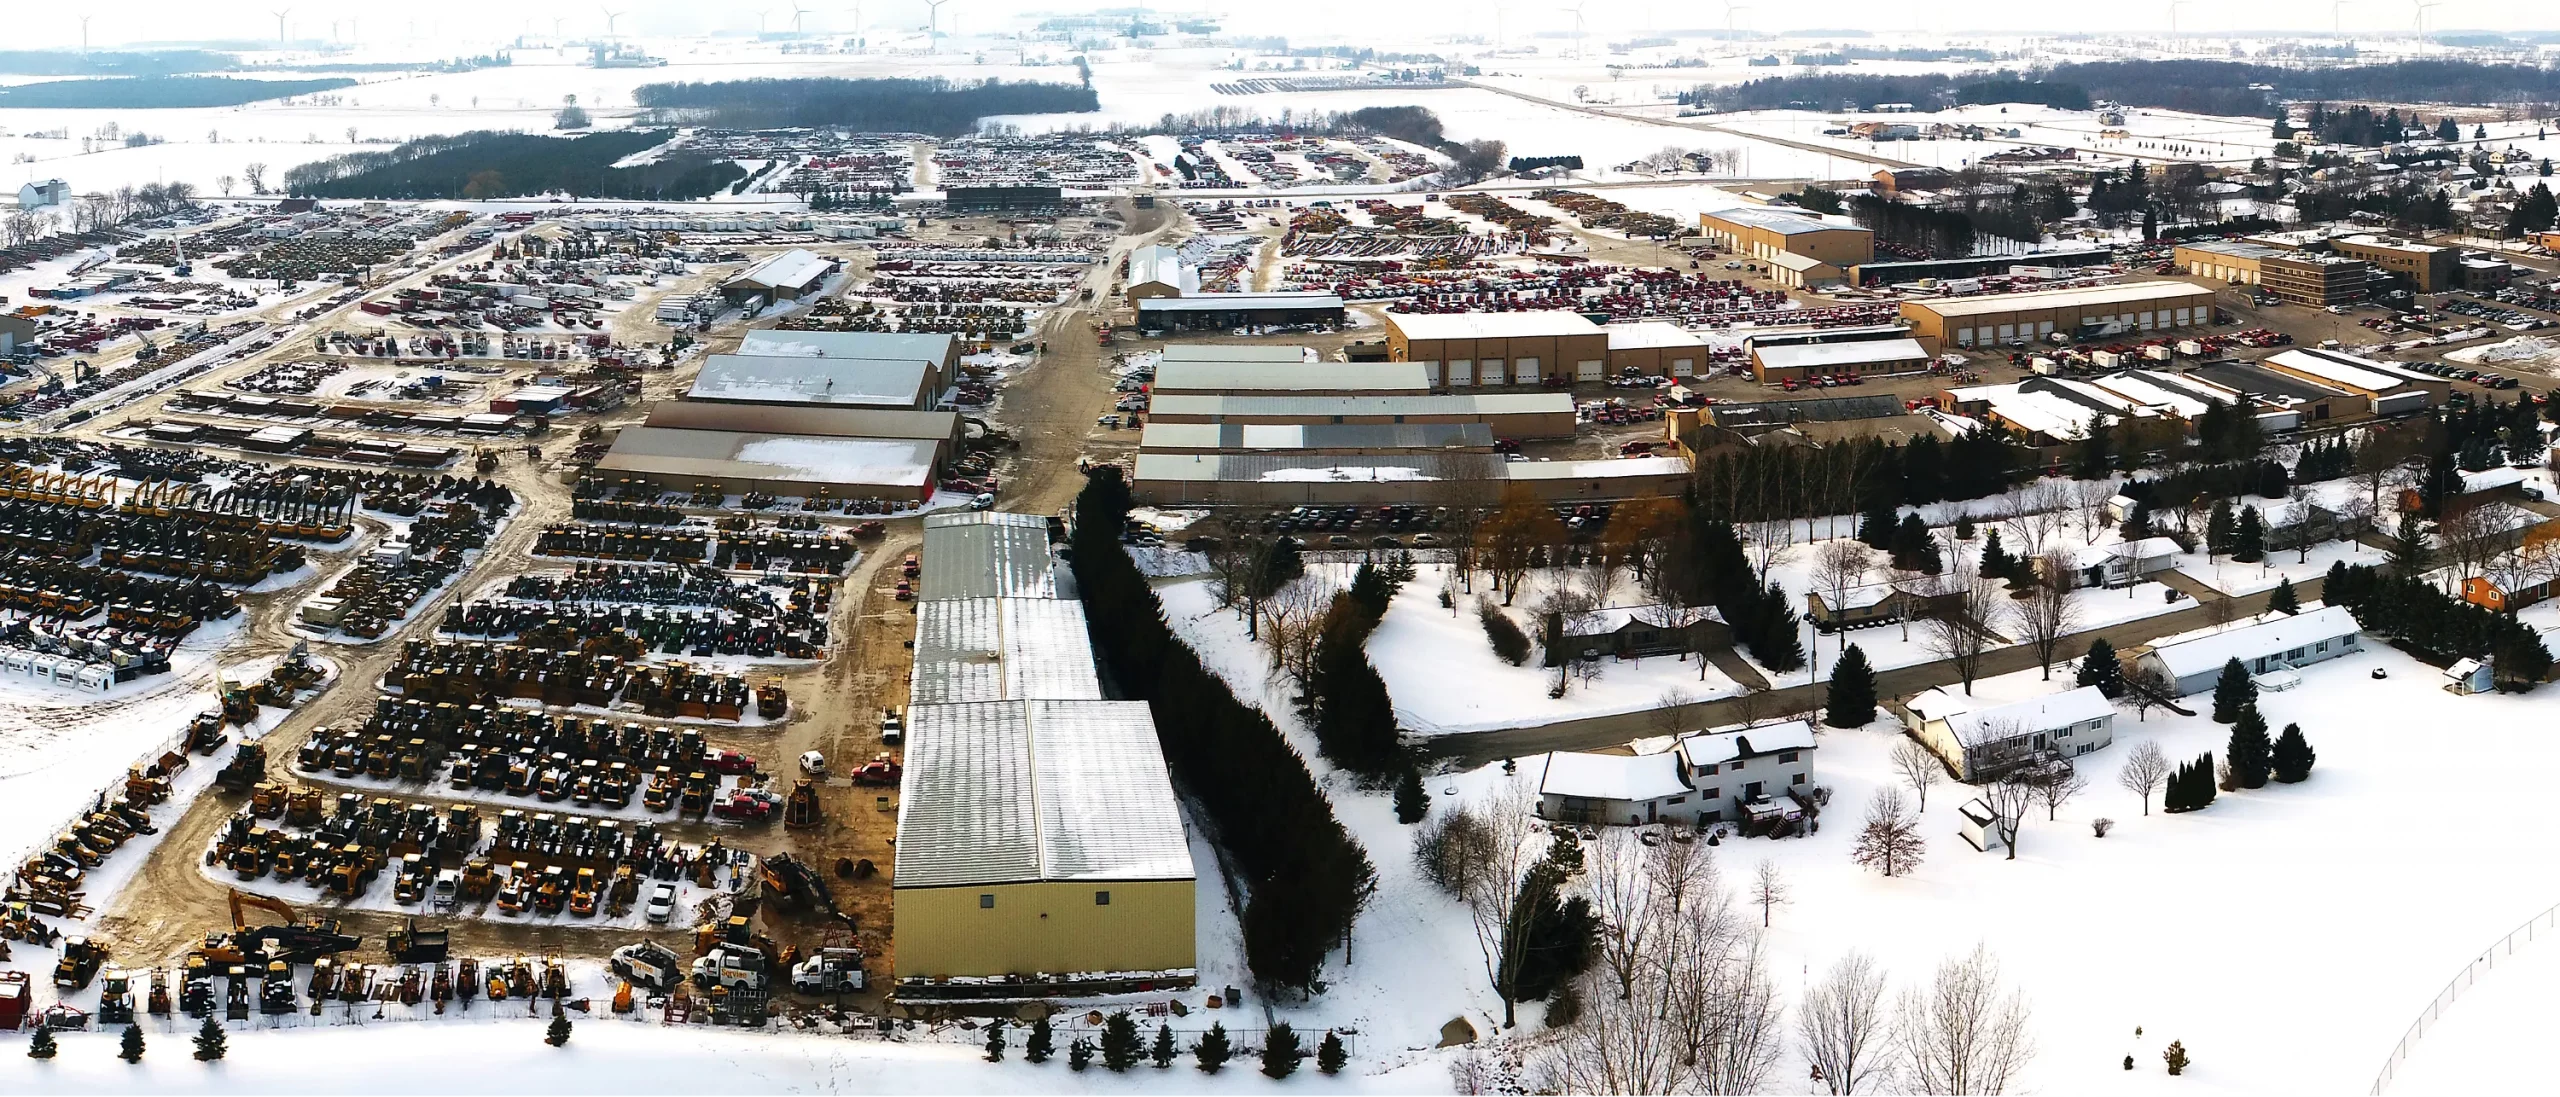 Overhead view of Brownsville Yard during winter.